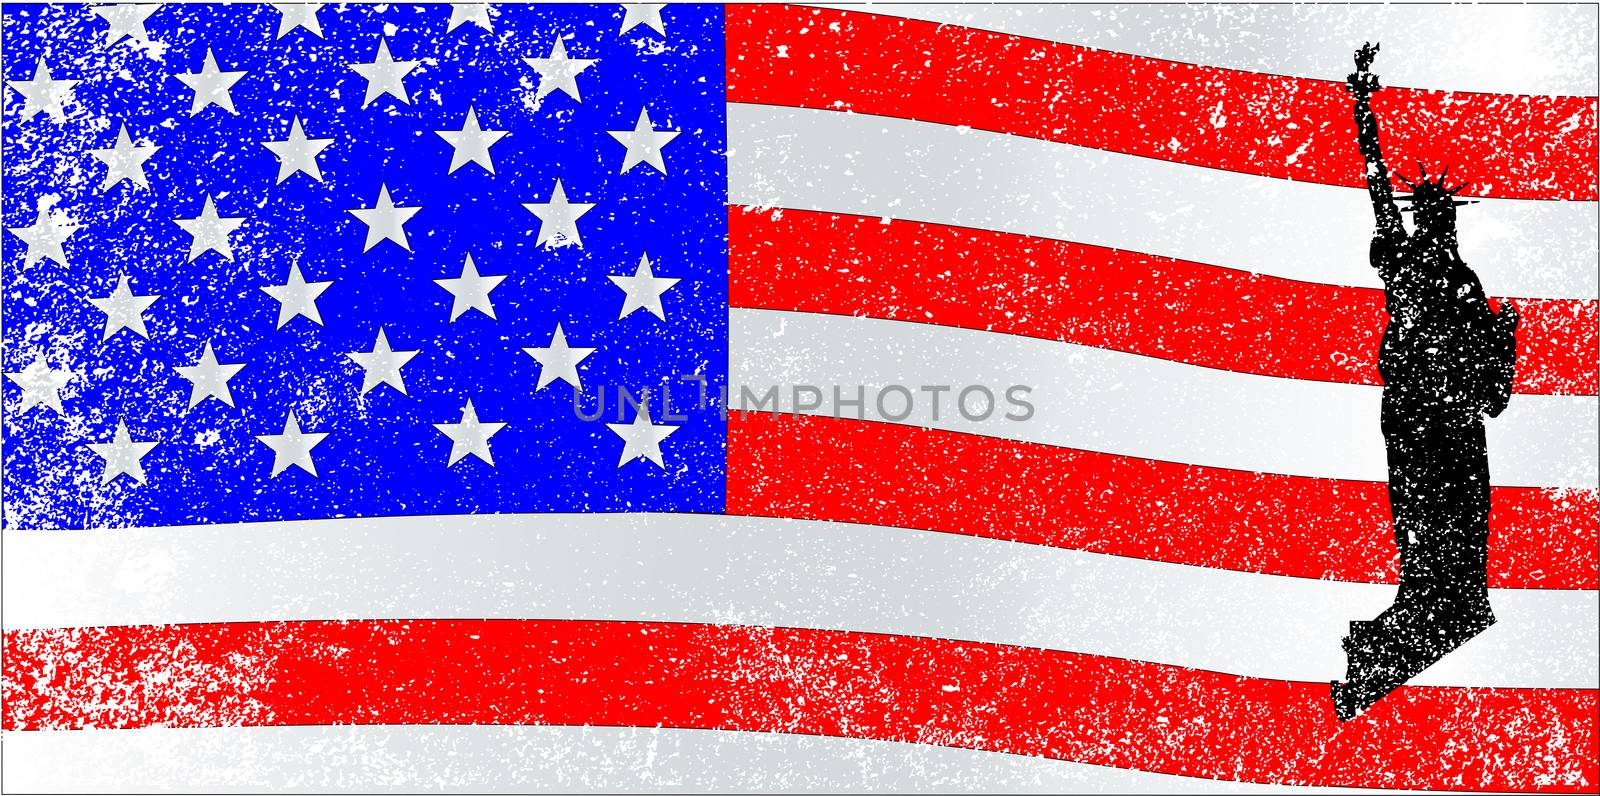 An American flag, the Stars and Stripes with a silhouette of the statue of liberty inset